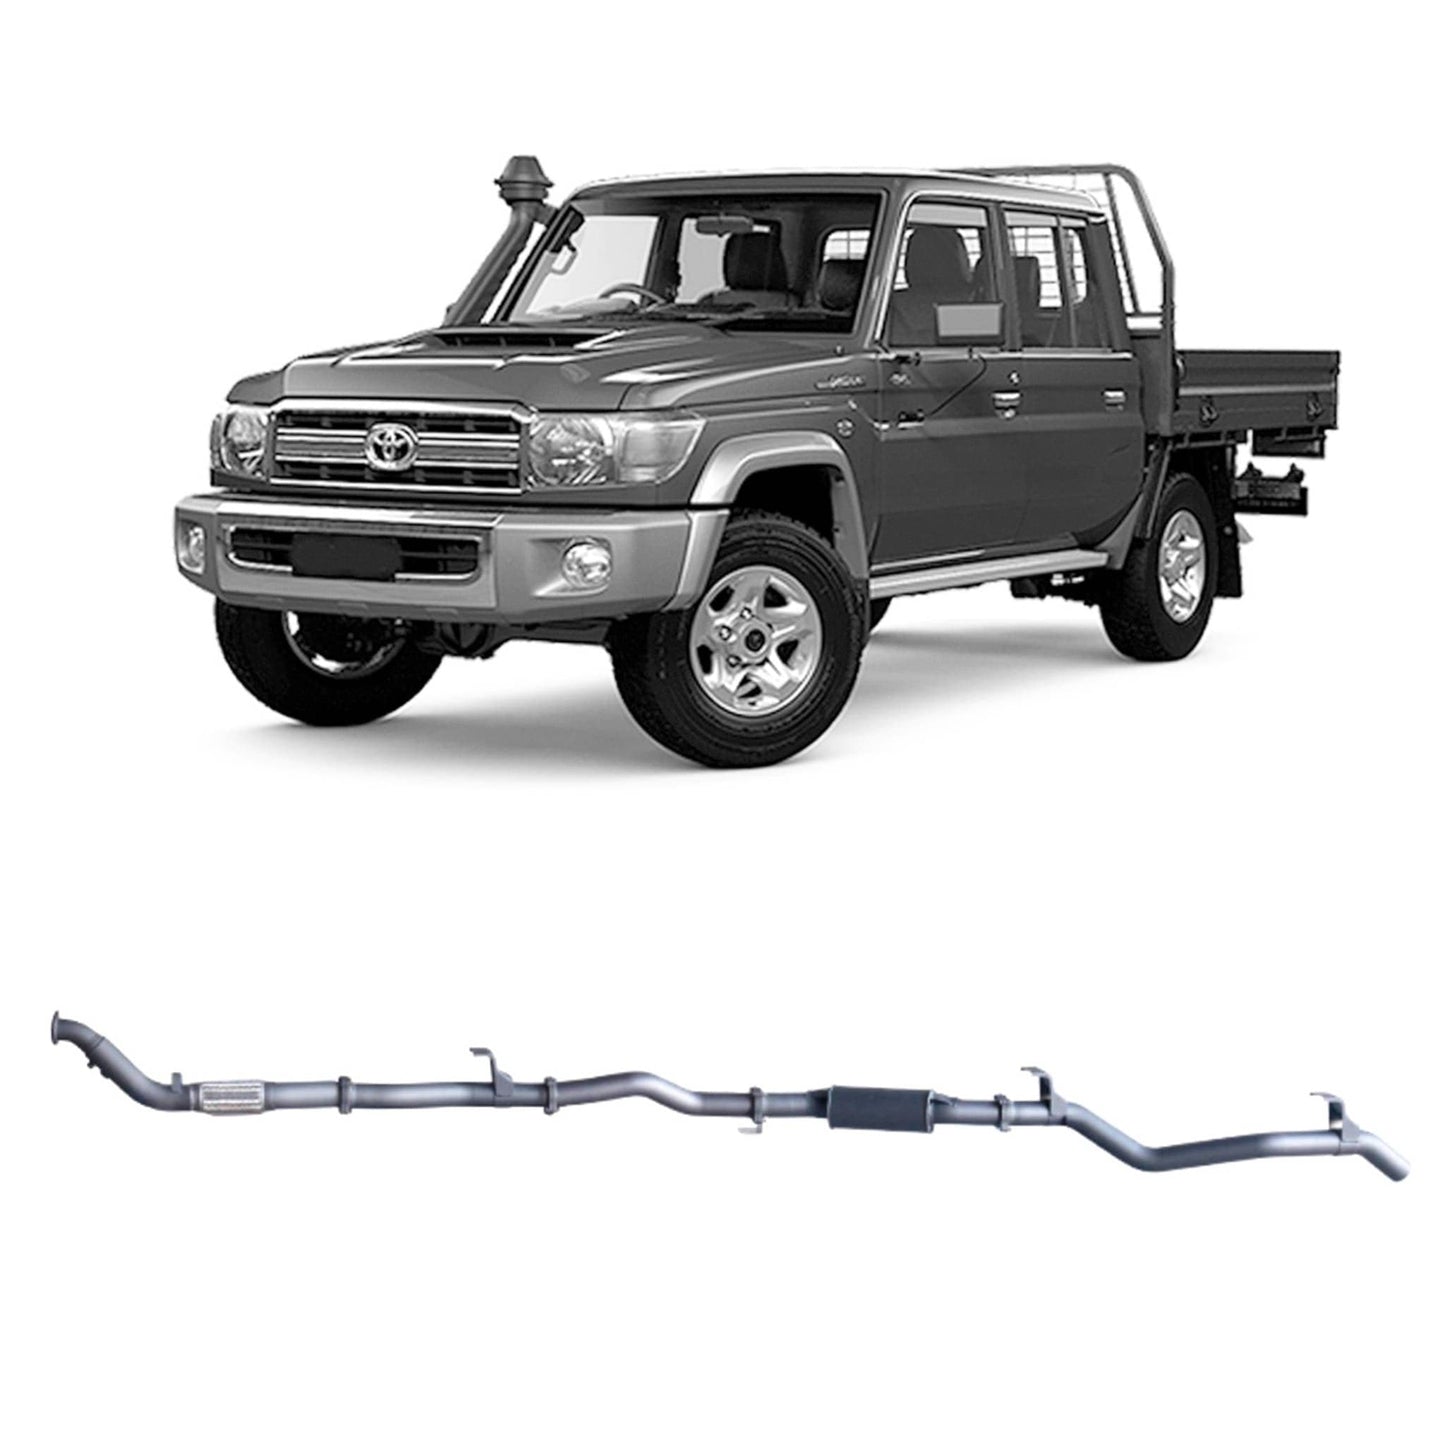 Redback Extreme Duty Exhaust for Toyota Landcruiser 79 Series Double Cab with Auxiliary Fuel Tank (01/2012 - 10/2016)